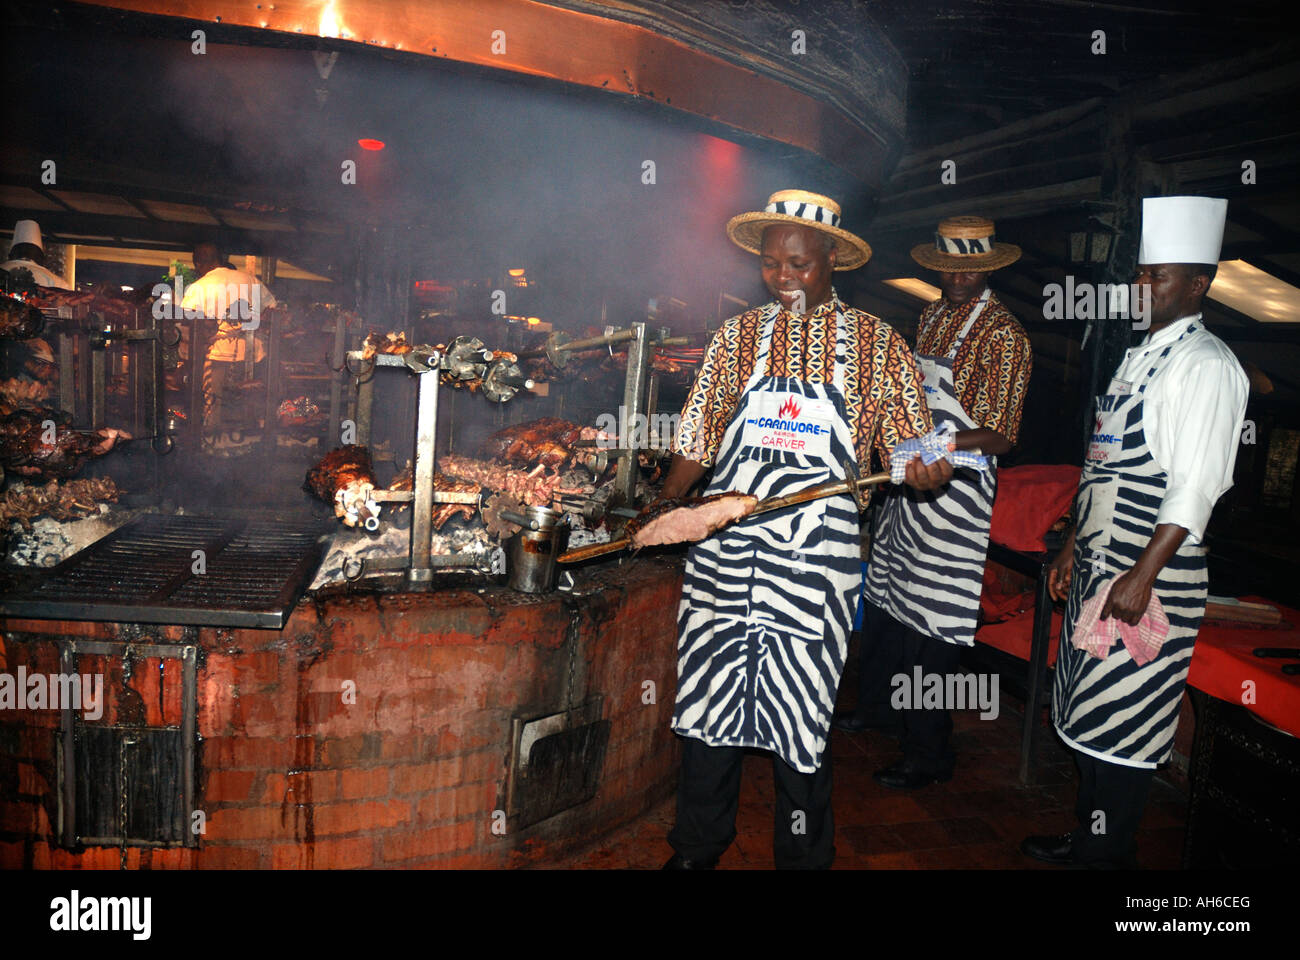 Three cooks working at the grill of the Carnivore Restaurant Nairobi Kenya East Africa Stock Photo